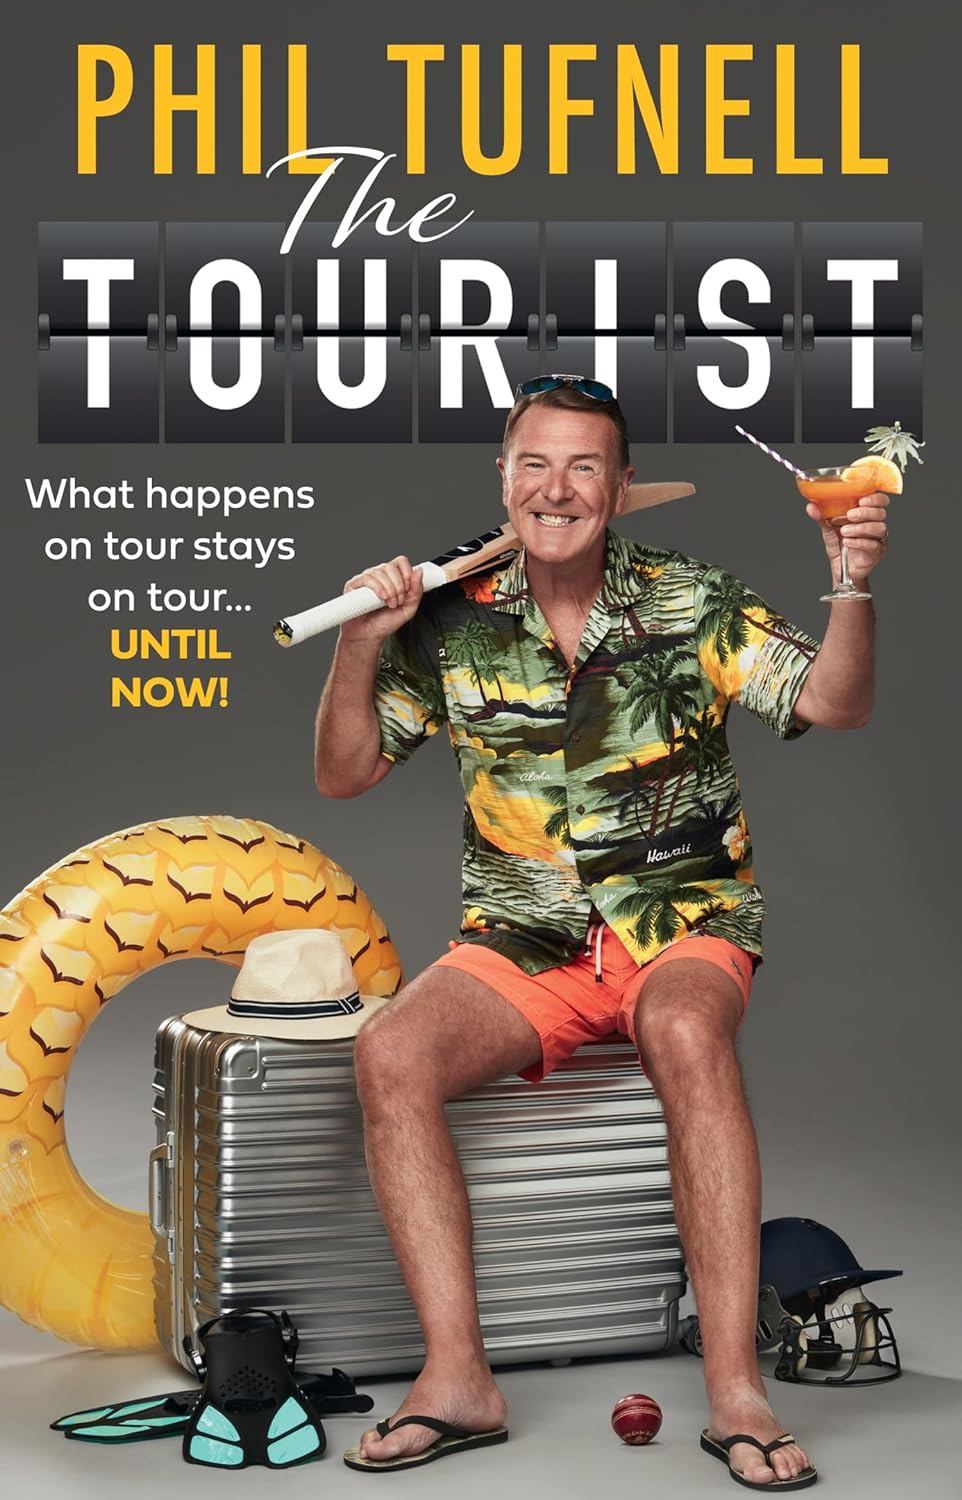 Phil Tufnell The Tourist book cover